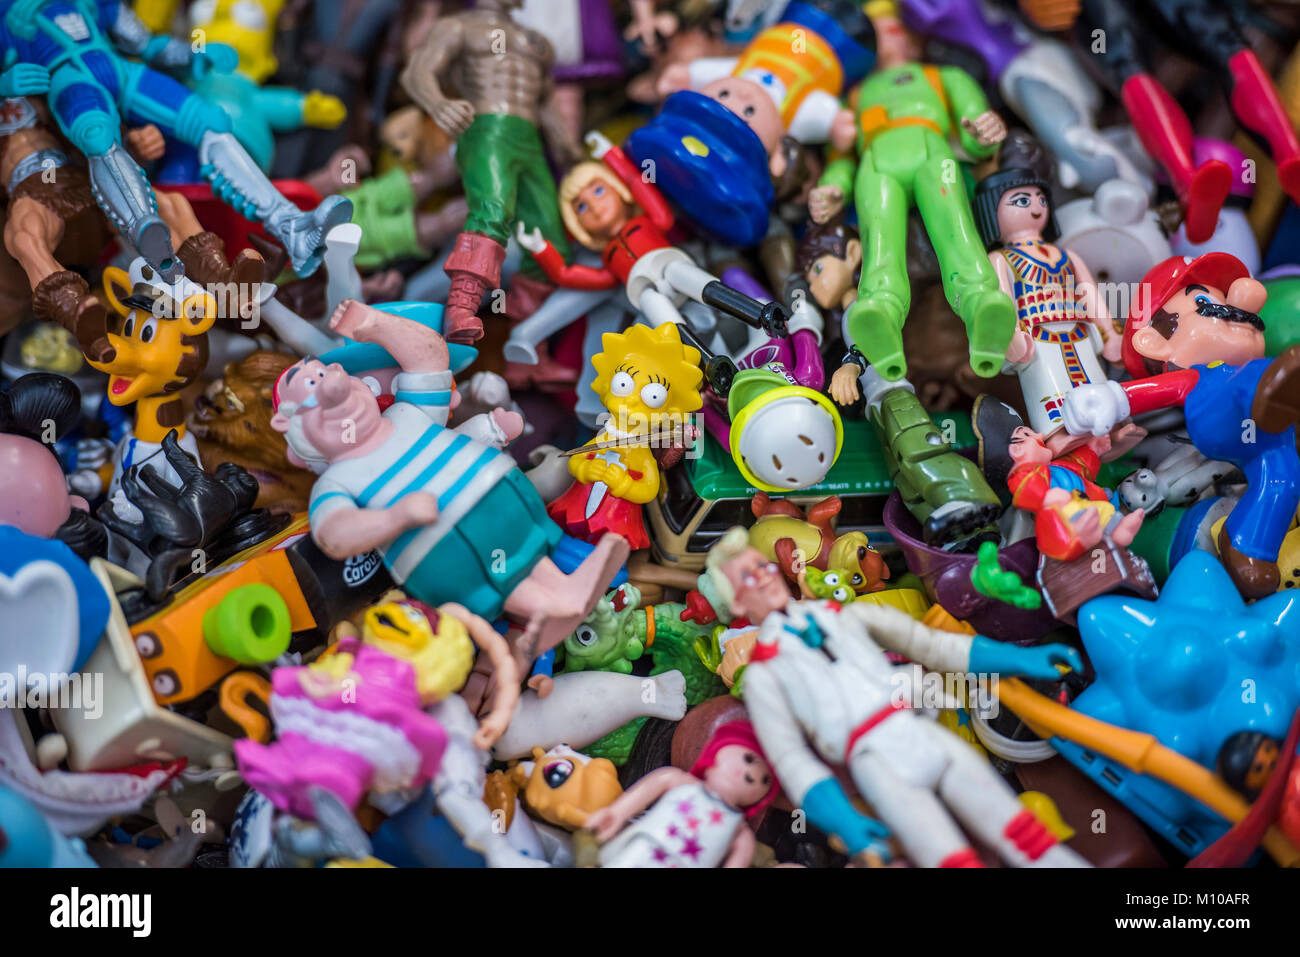 London, UK. 25th Jan, 2018. Toys saved from landfill by The Toy Project Charity, which recycles unwanted toy to children who need them, including the Grenfell Tower nursery - The annual Toy Fair at Olympia, London. Credit: Guy Bell/Alamy Live News Stock Photo